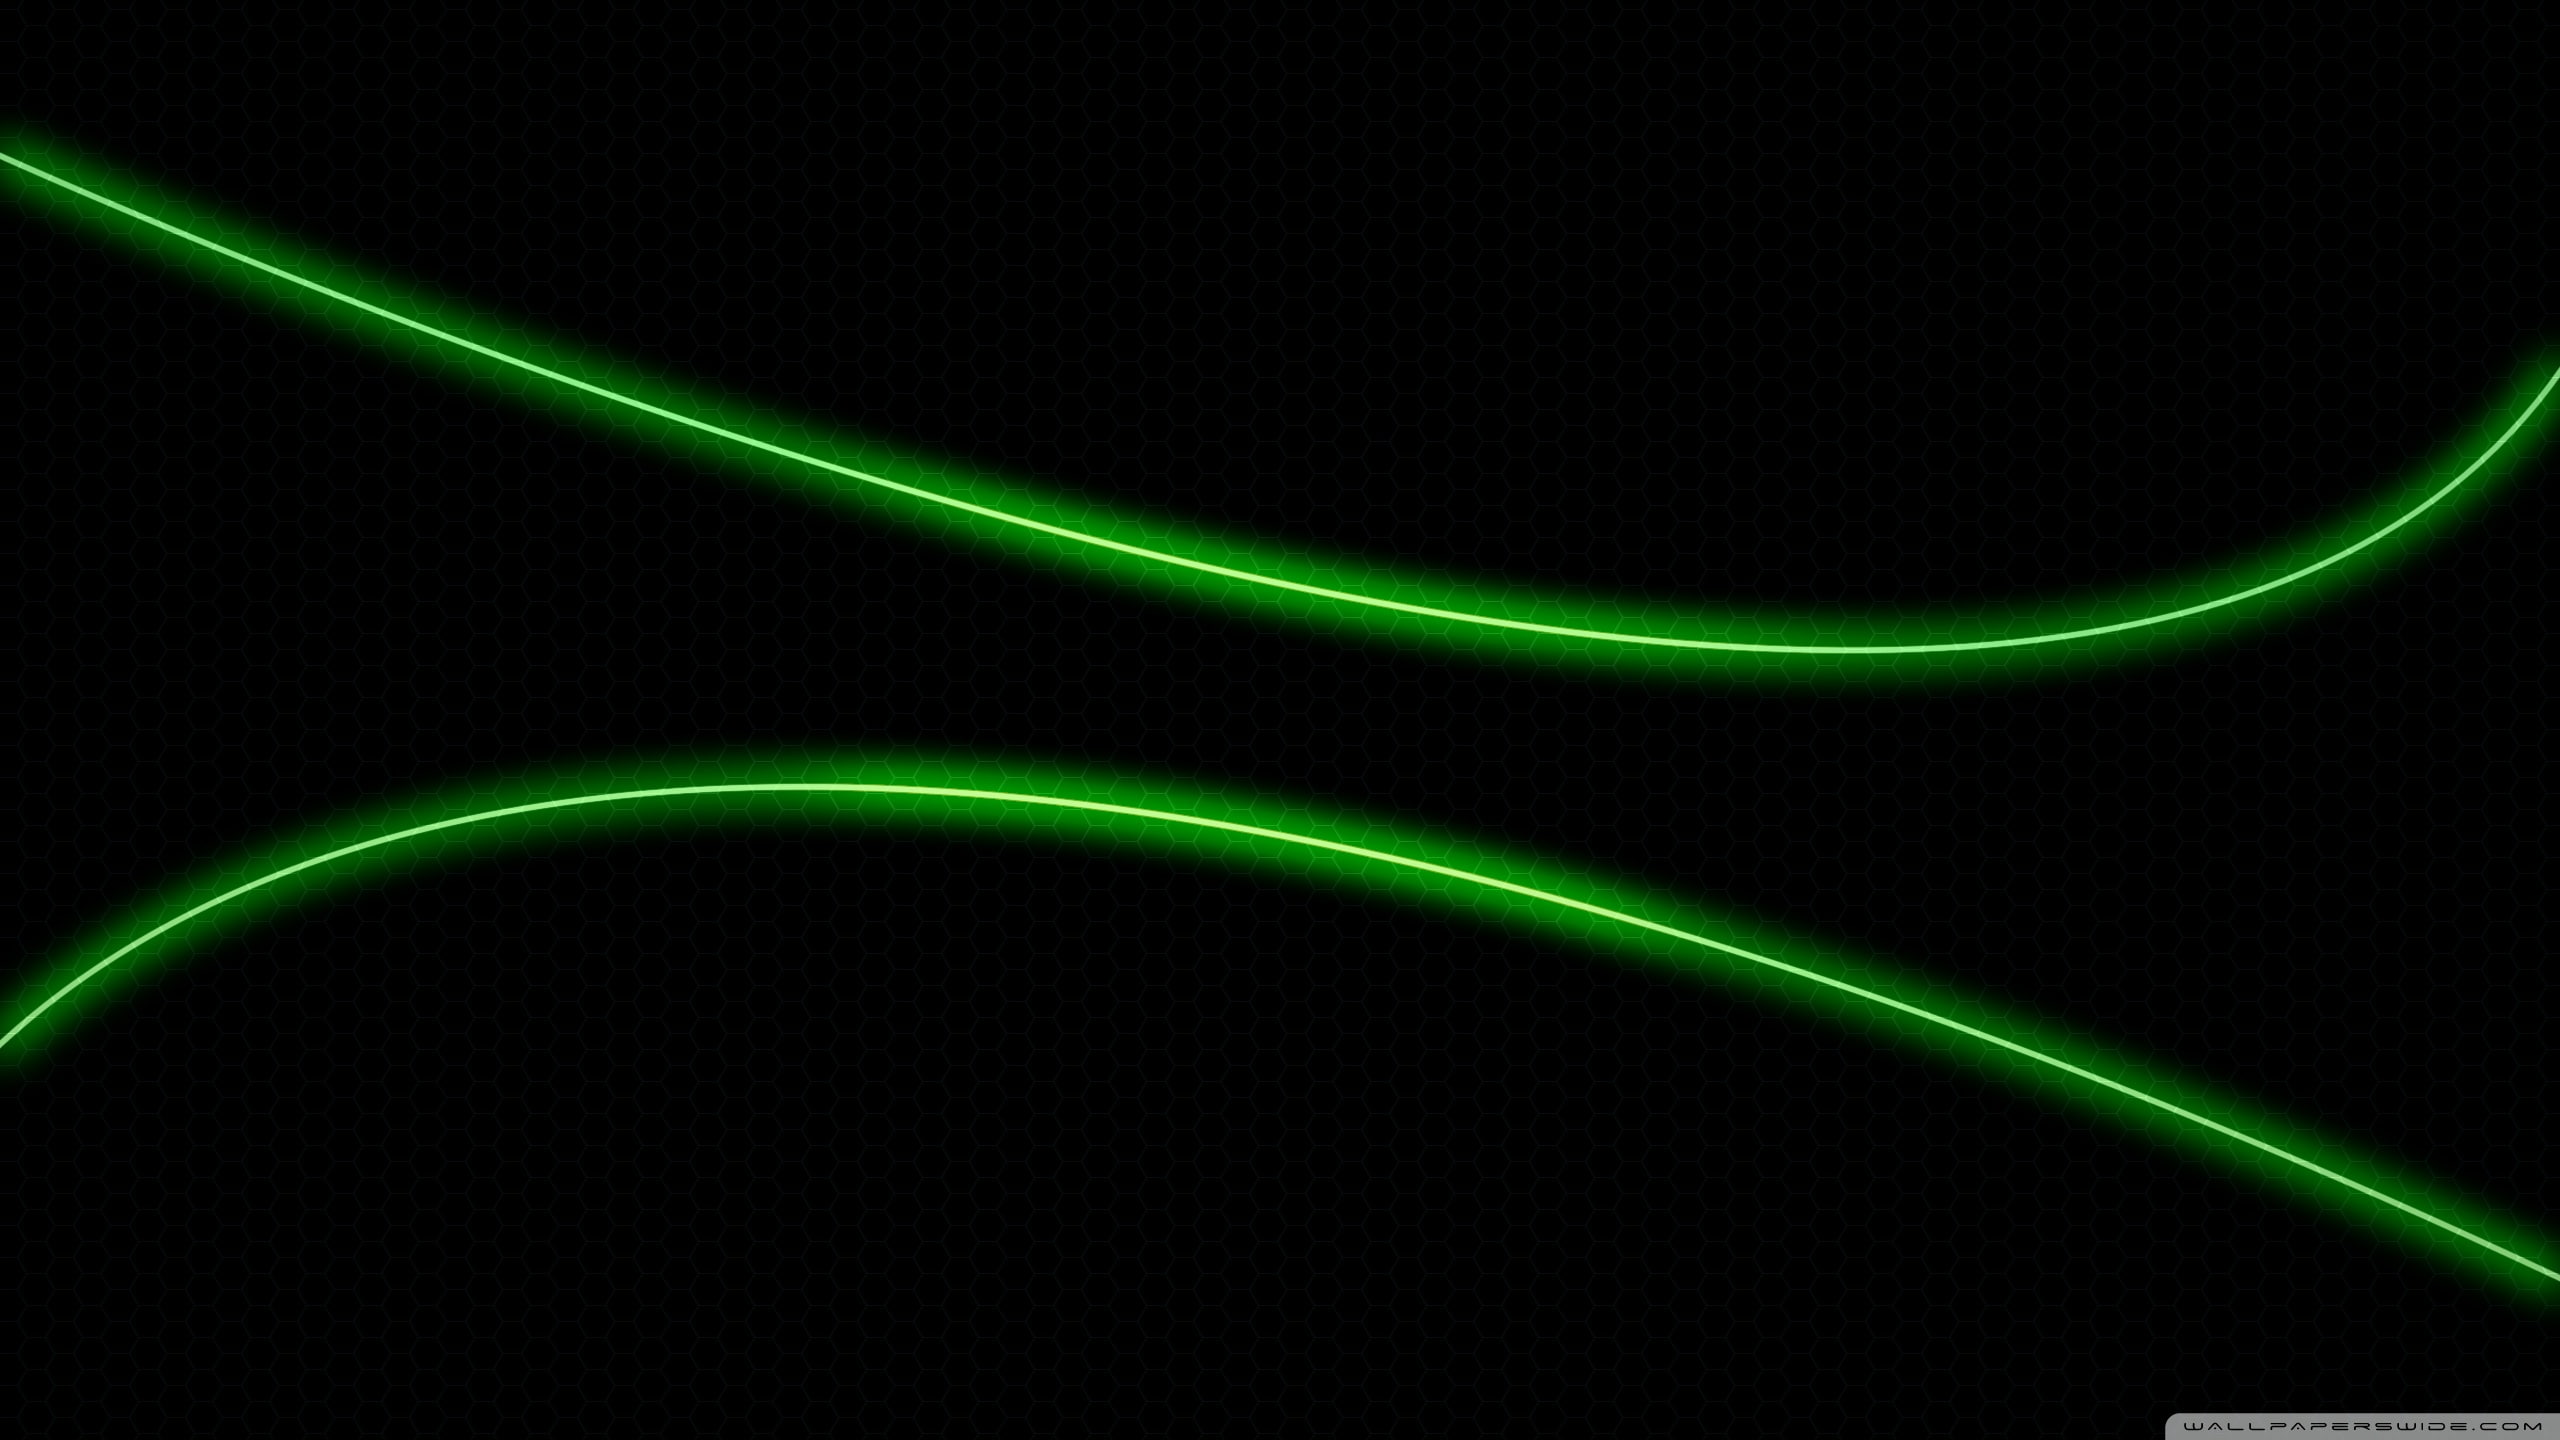 2560x1440 px, Green, light, neon, green color, abstract, black background